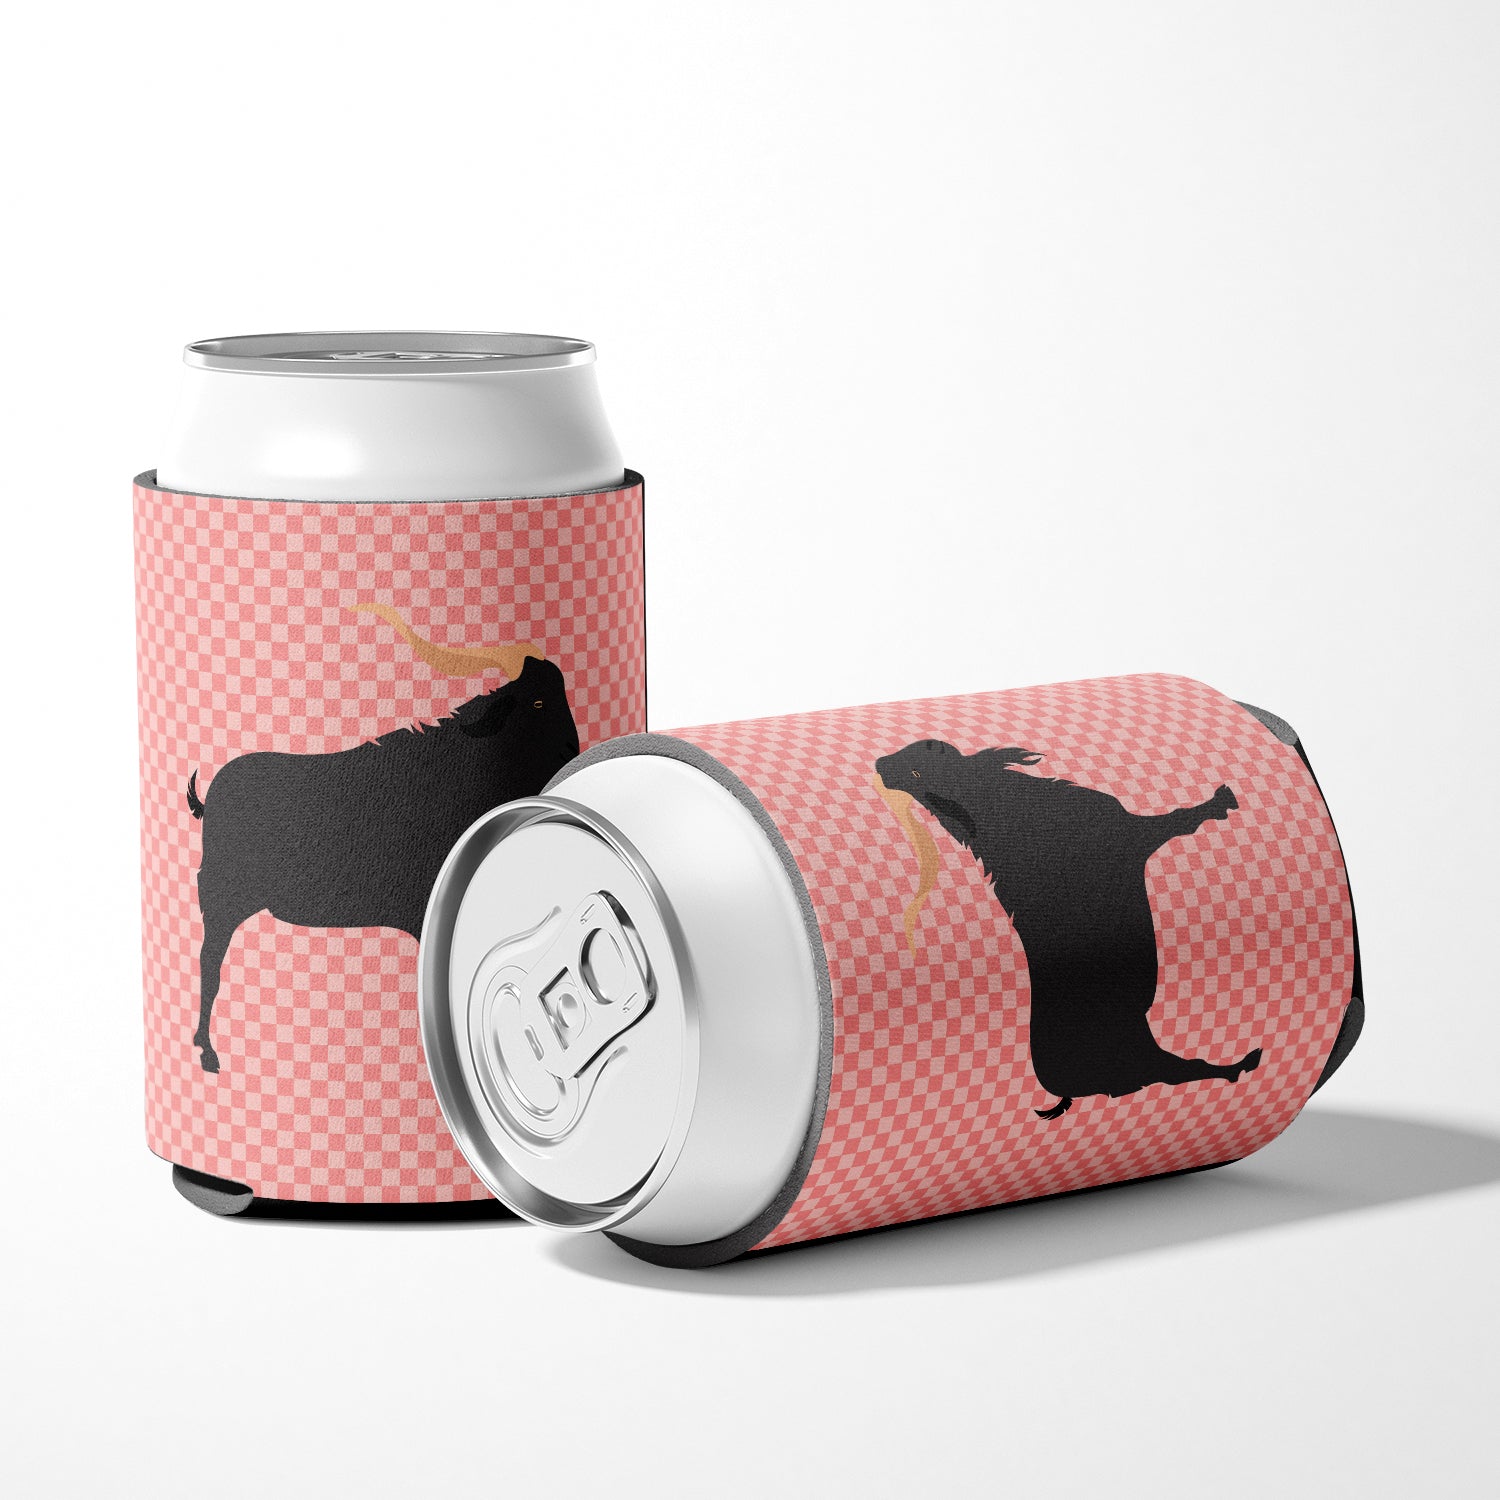 Verata Goat Pink Check Can or Bottle Hugger BB7882CC